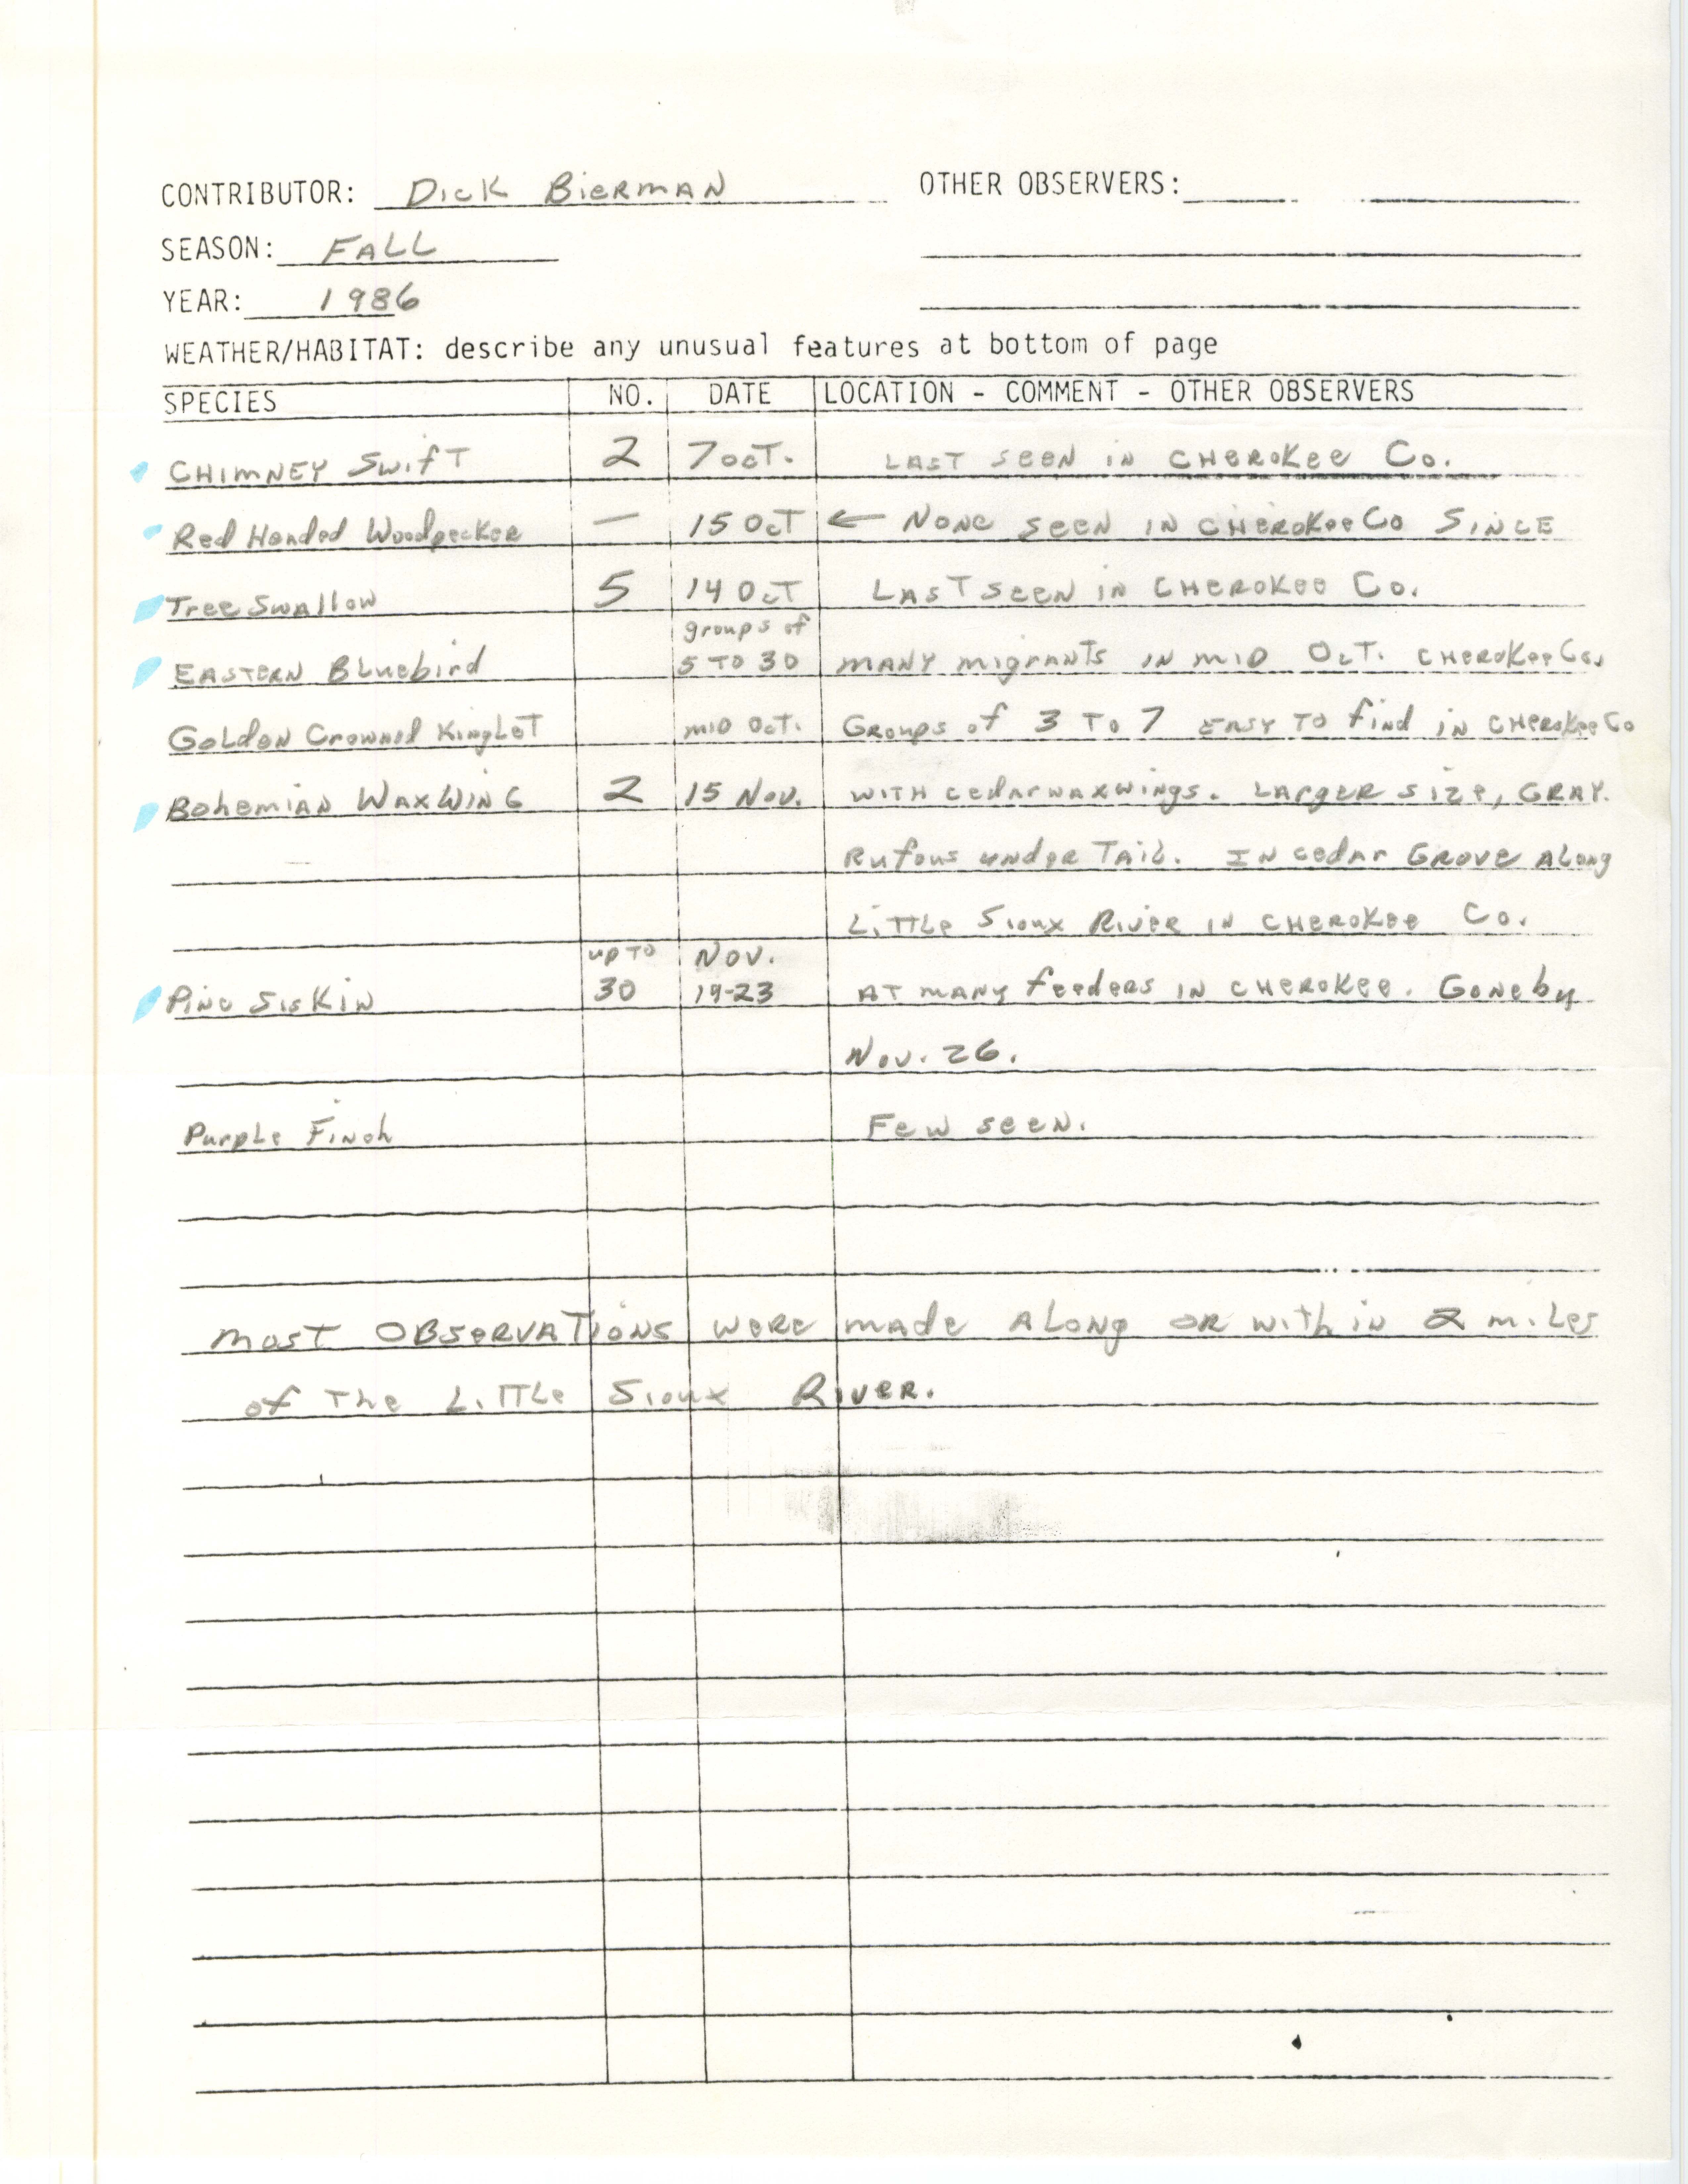 Field notes contributed by Dick Bierman, fall 1986